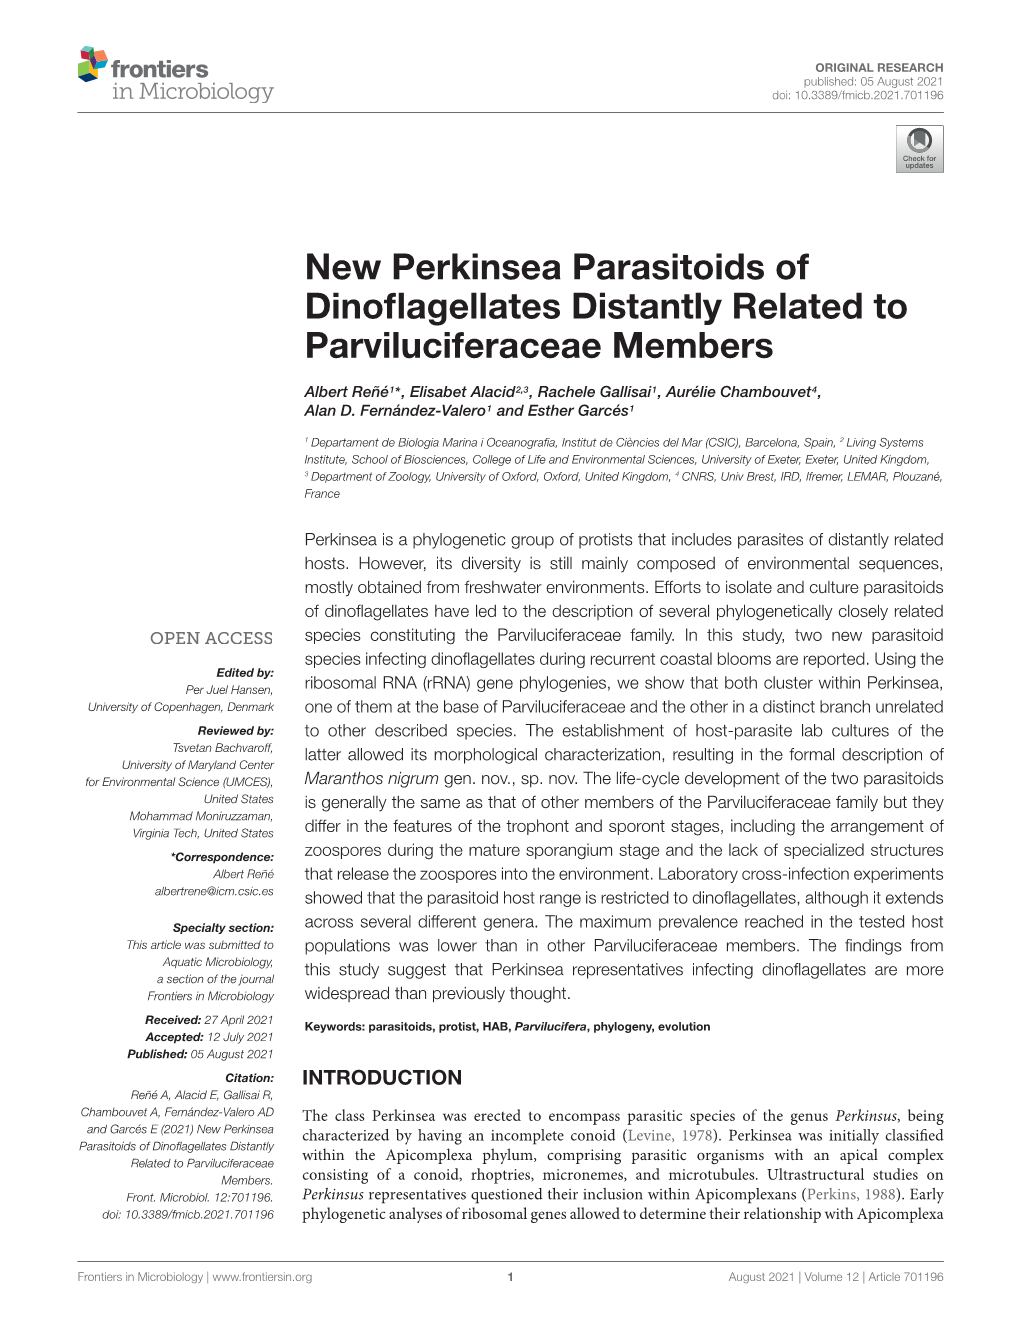 New Perkinsea Parasitoids of Dinoflagellates Distantly Related To